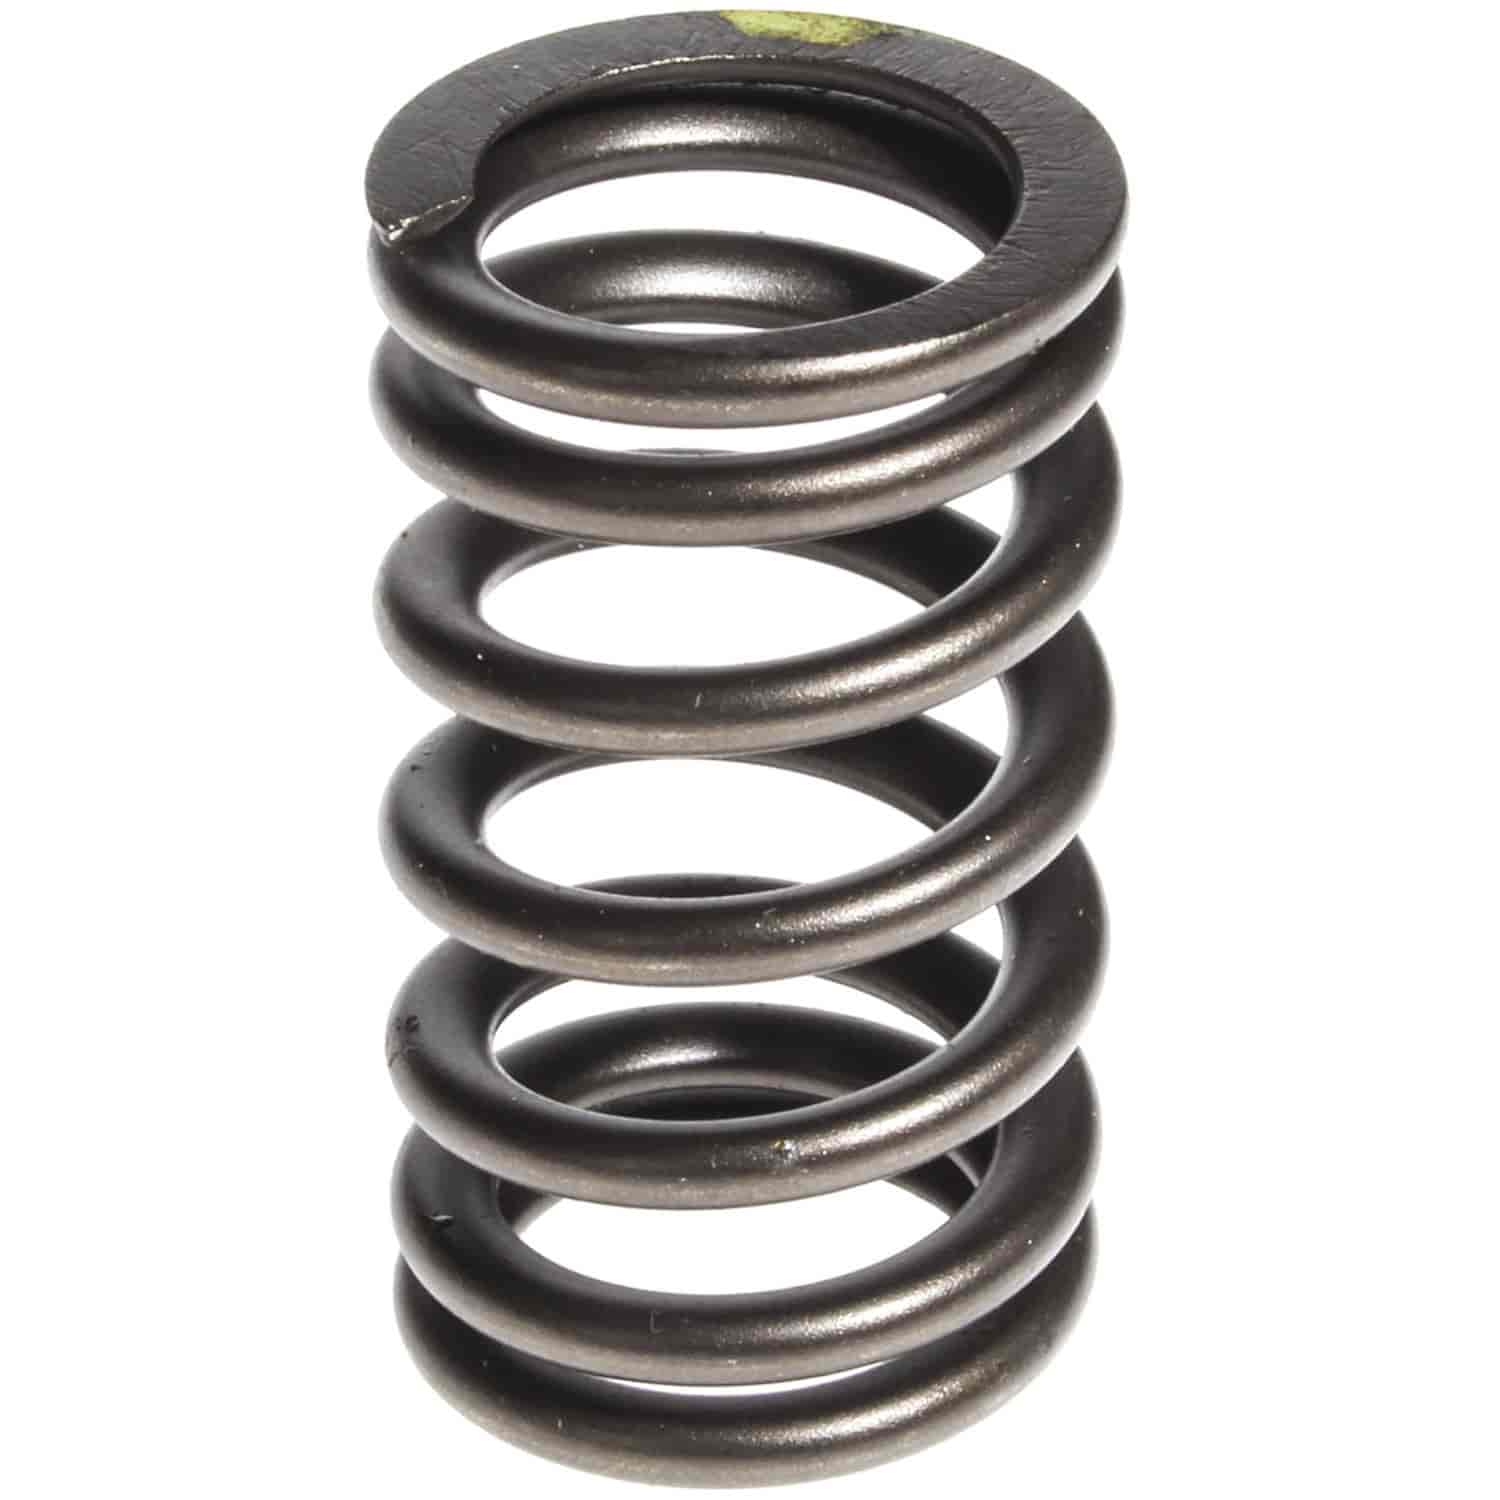 Valve Springs for Cummins ISC QSC QSL Engines